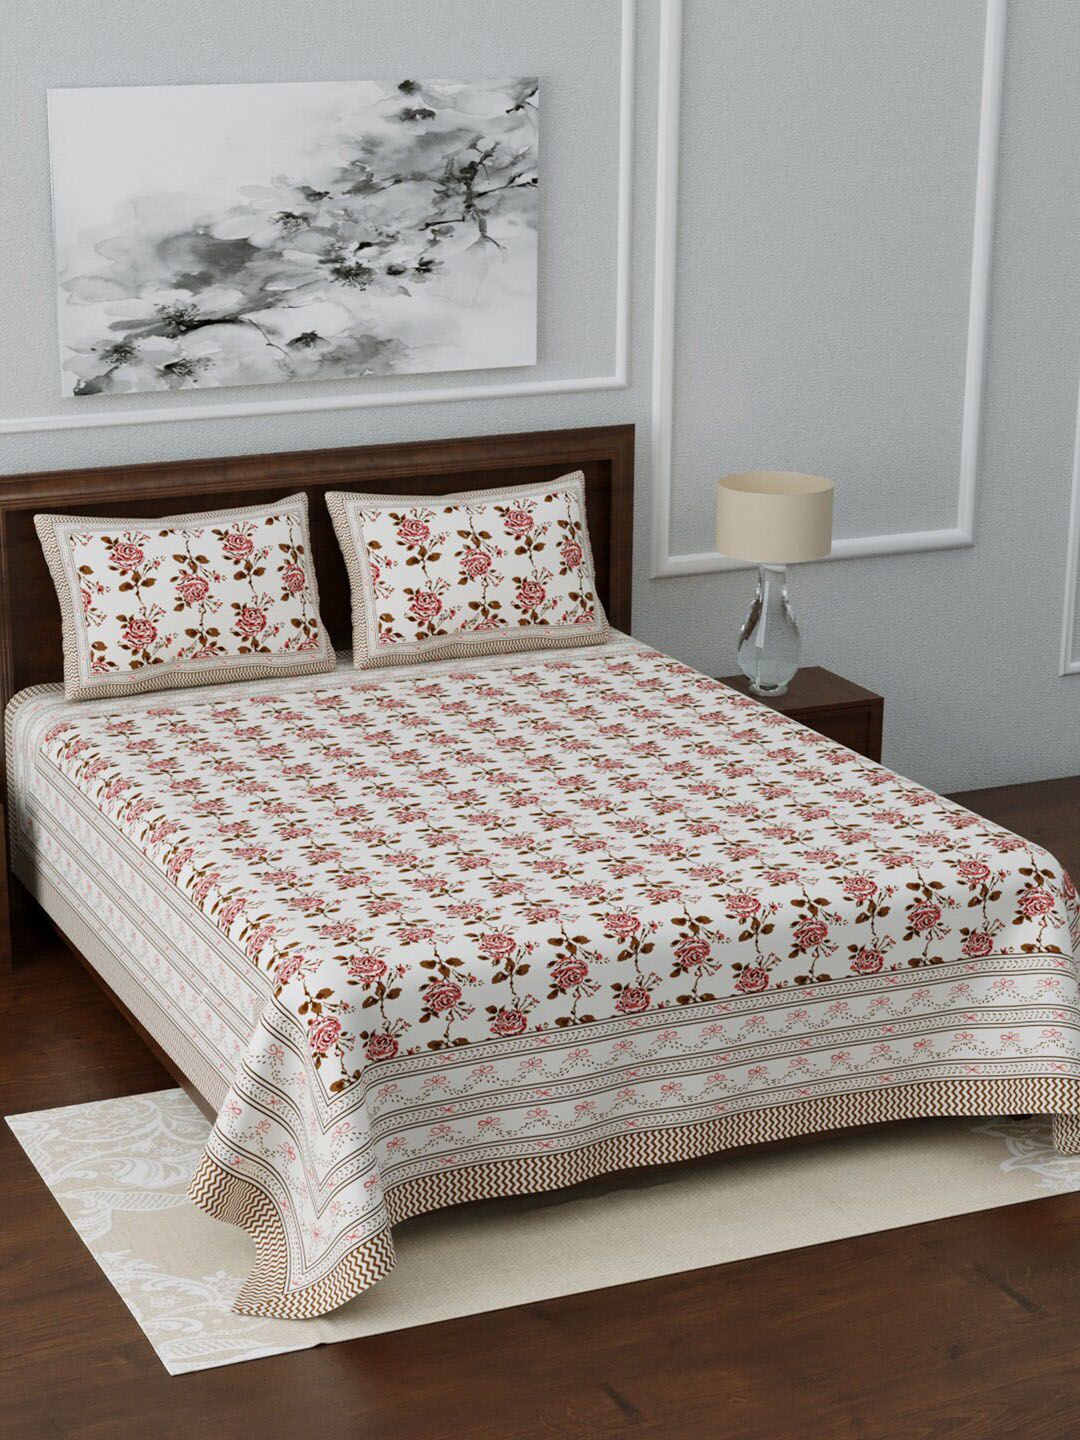 LIVING ROOTS White & Pink Printed Jaipuri 210 TC Cotton Double Extra Large Bedsheets With 2 Pillow Covers Price in India